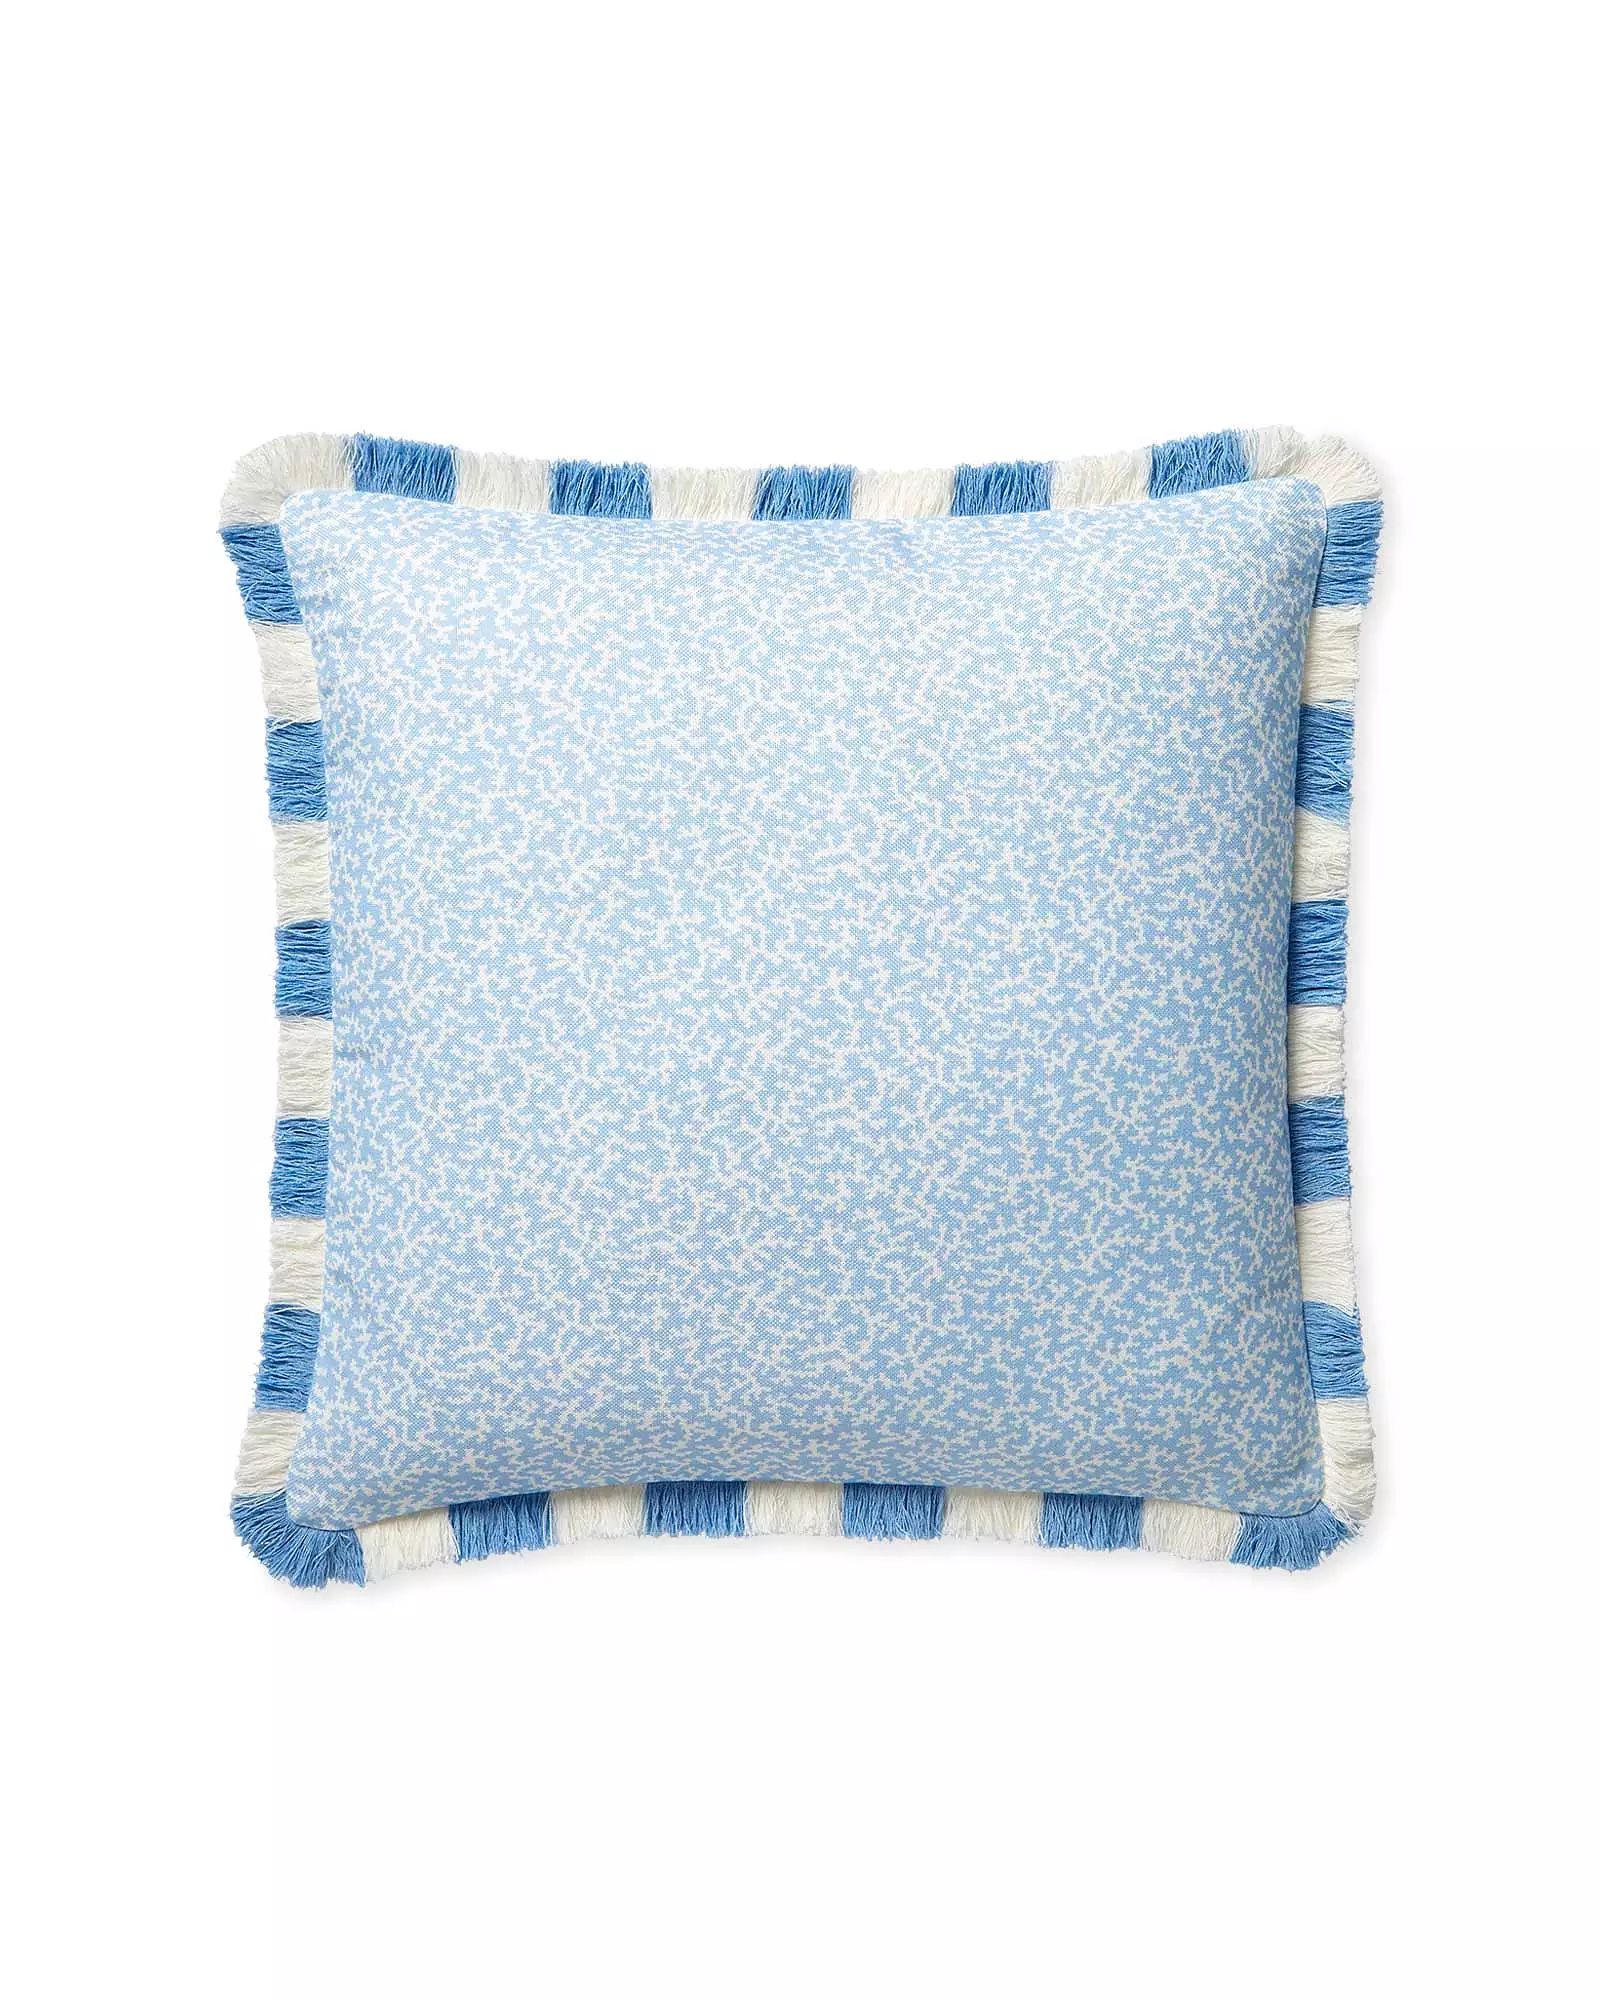 Reef Pillow Cover | Serena and Lily